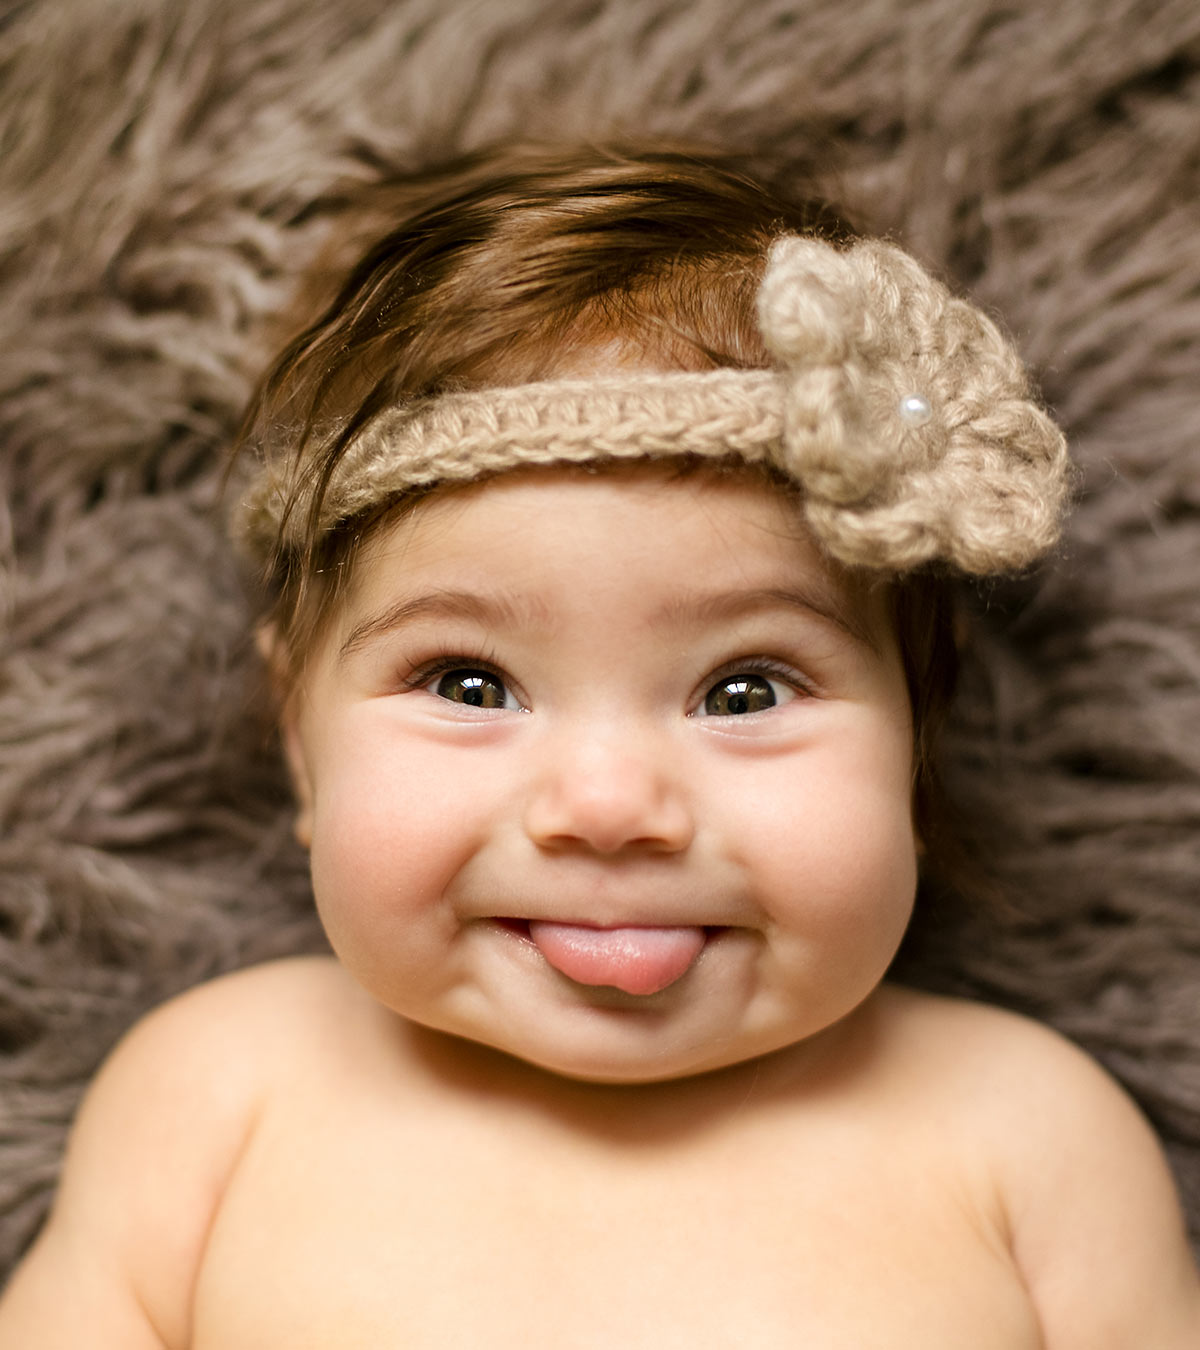 800 Cute Nicknames Or Pet Names For Baby Boys And Girls